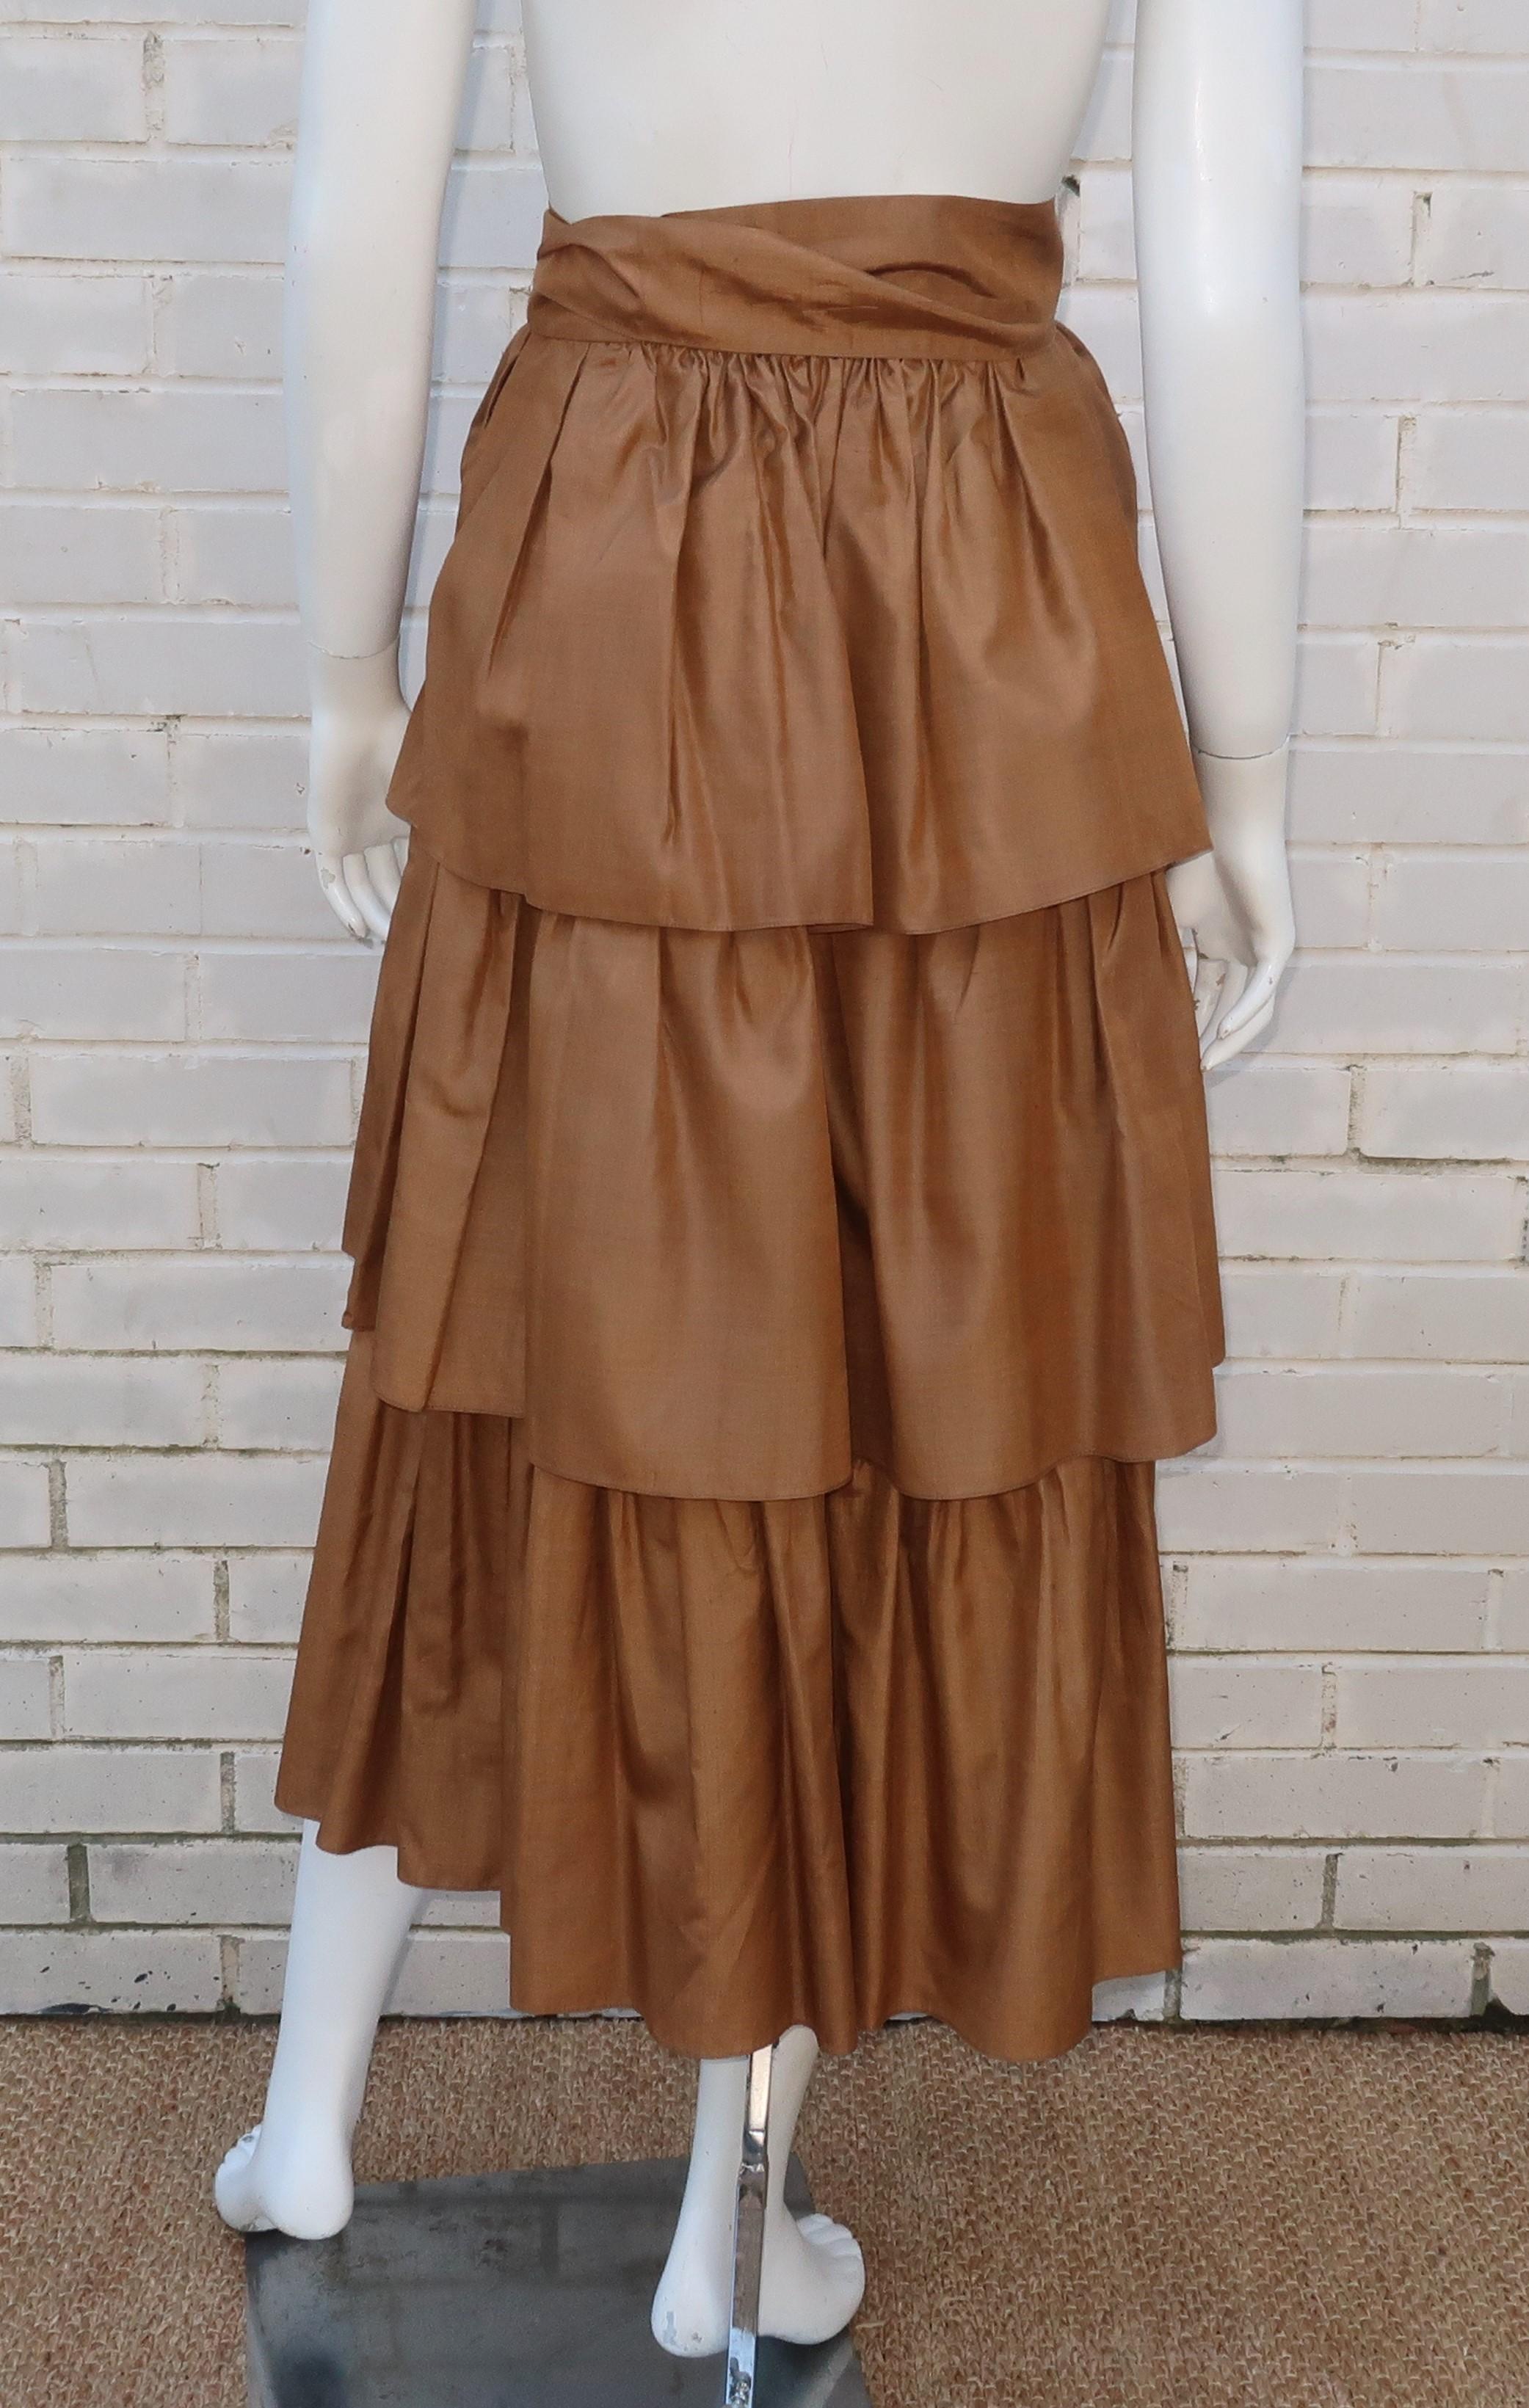 YVES SAINT LAURENT Rive Gauche Silk Tiered Peasant Skirt, 1970's For Sale 3